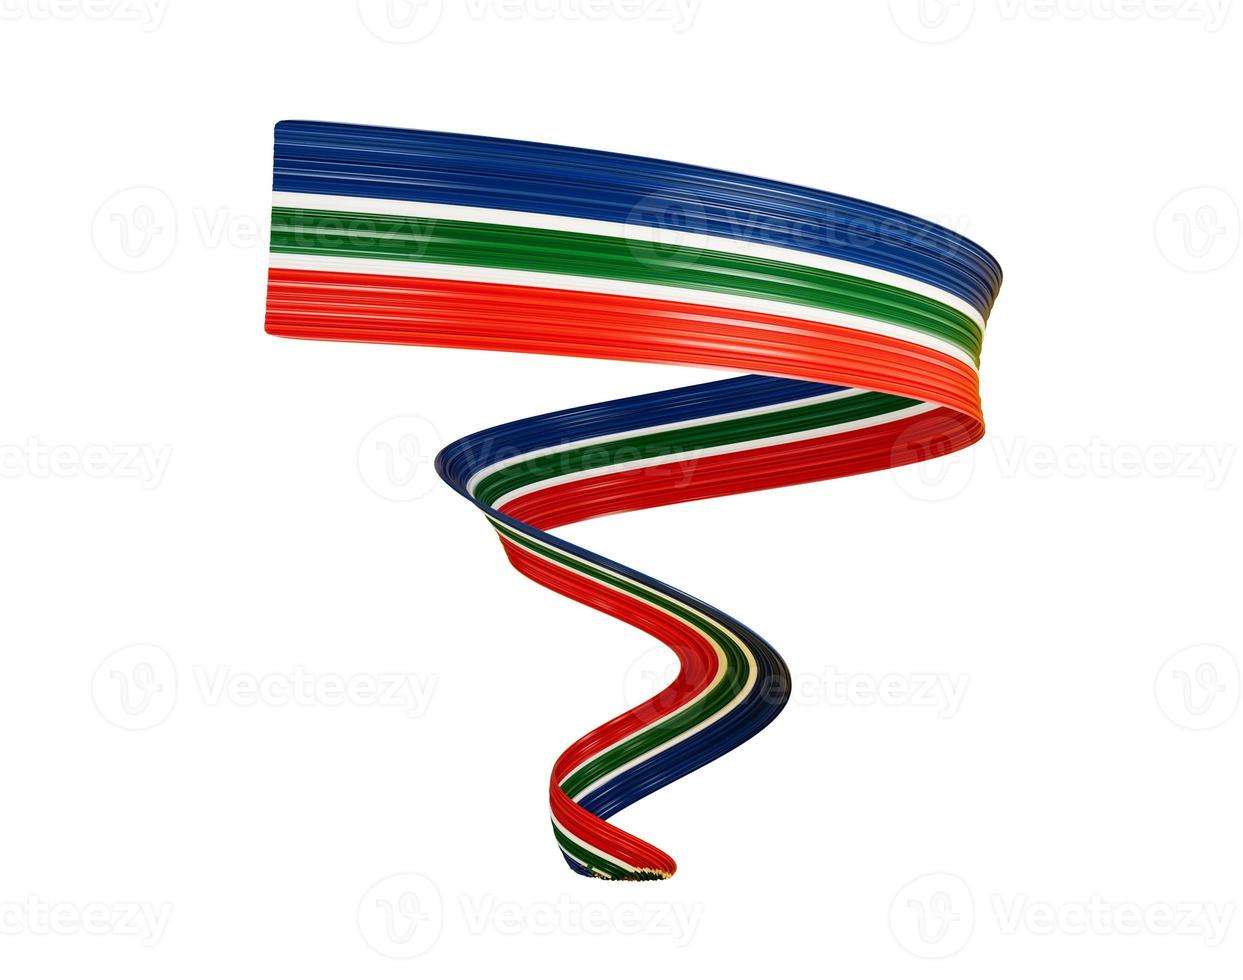 3d Flag Of South Africa, 3d Waving Ribbon Flag Of South Africa On White Background, 3d illustration photo